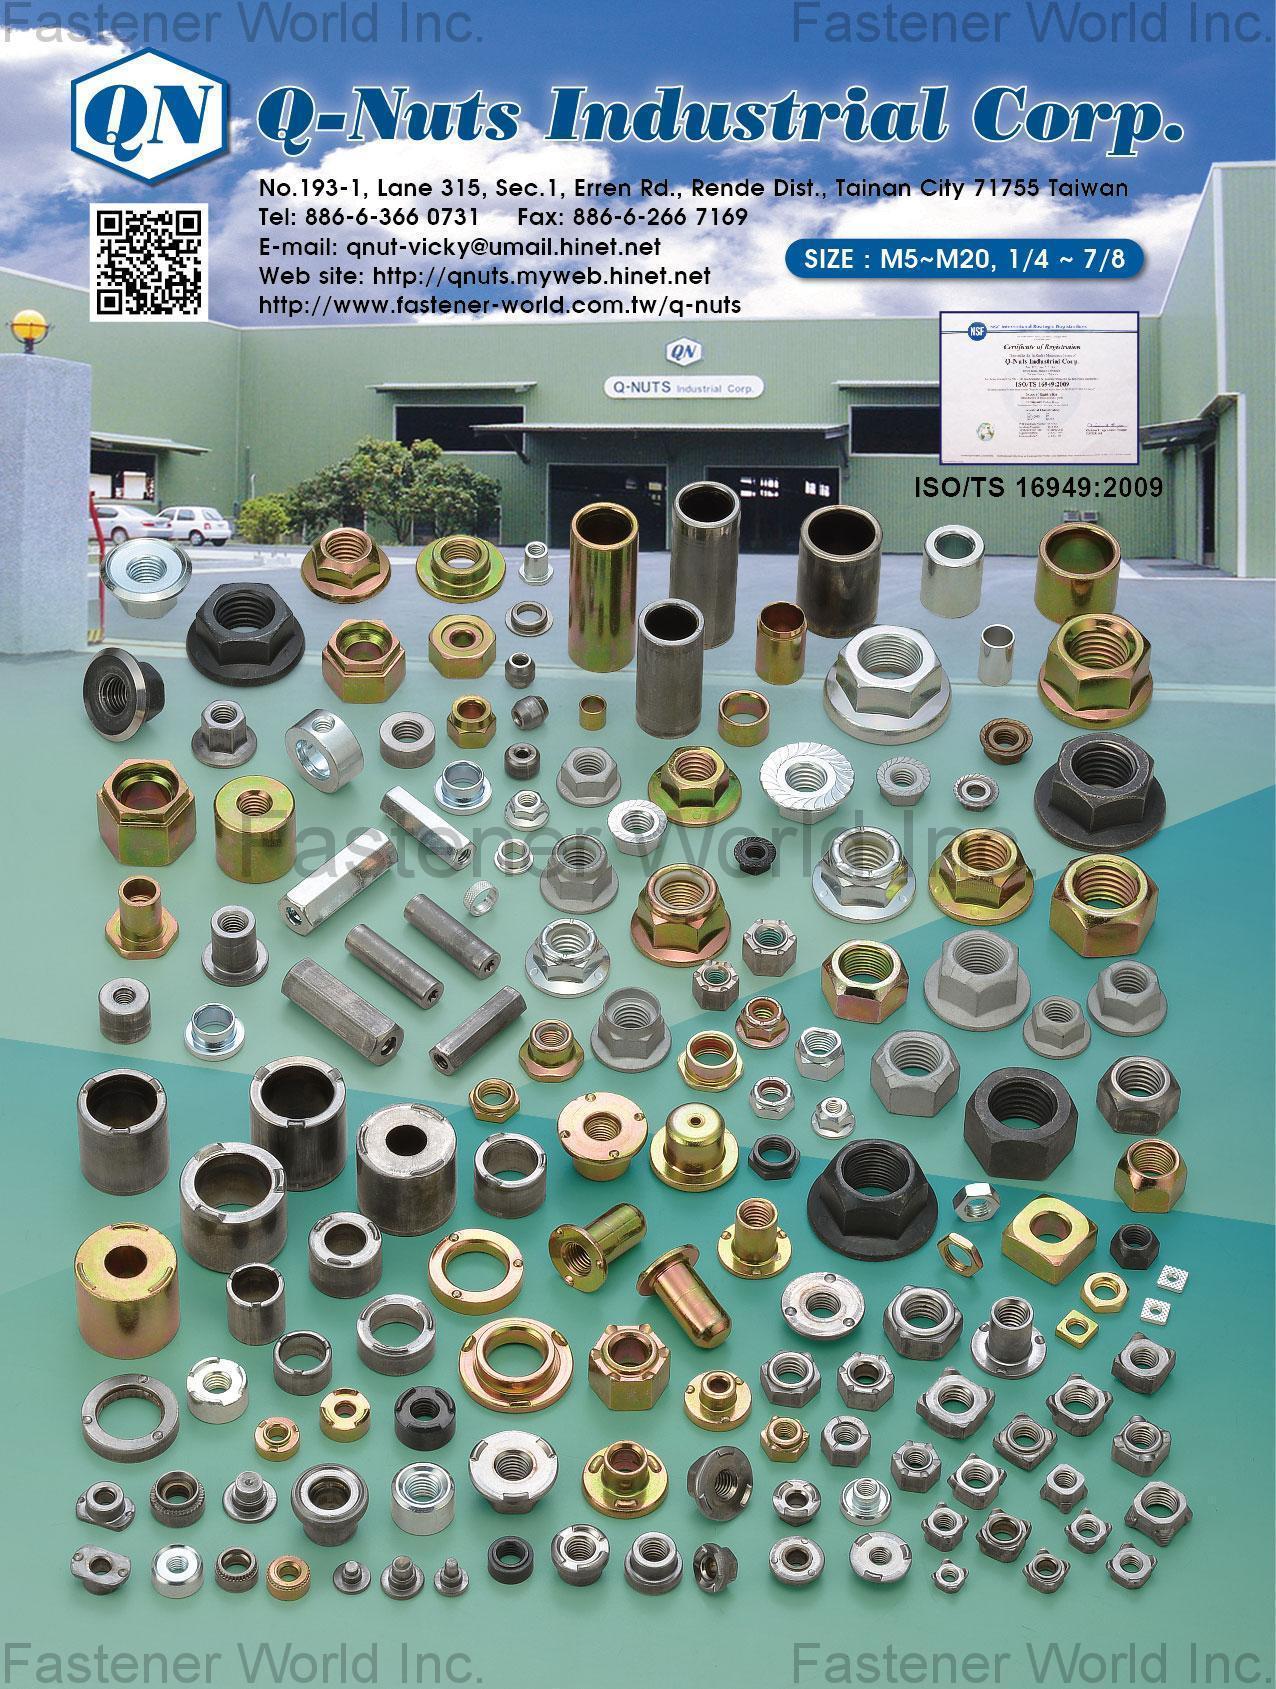 Q-NUTS INDUSTRIAL CORP. , Flange Nuts, Weld Nuts, Special Nuts, Spacers , Nuts